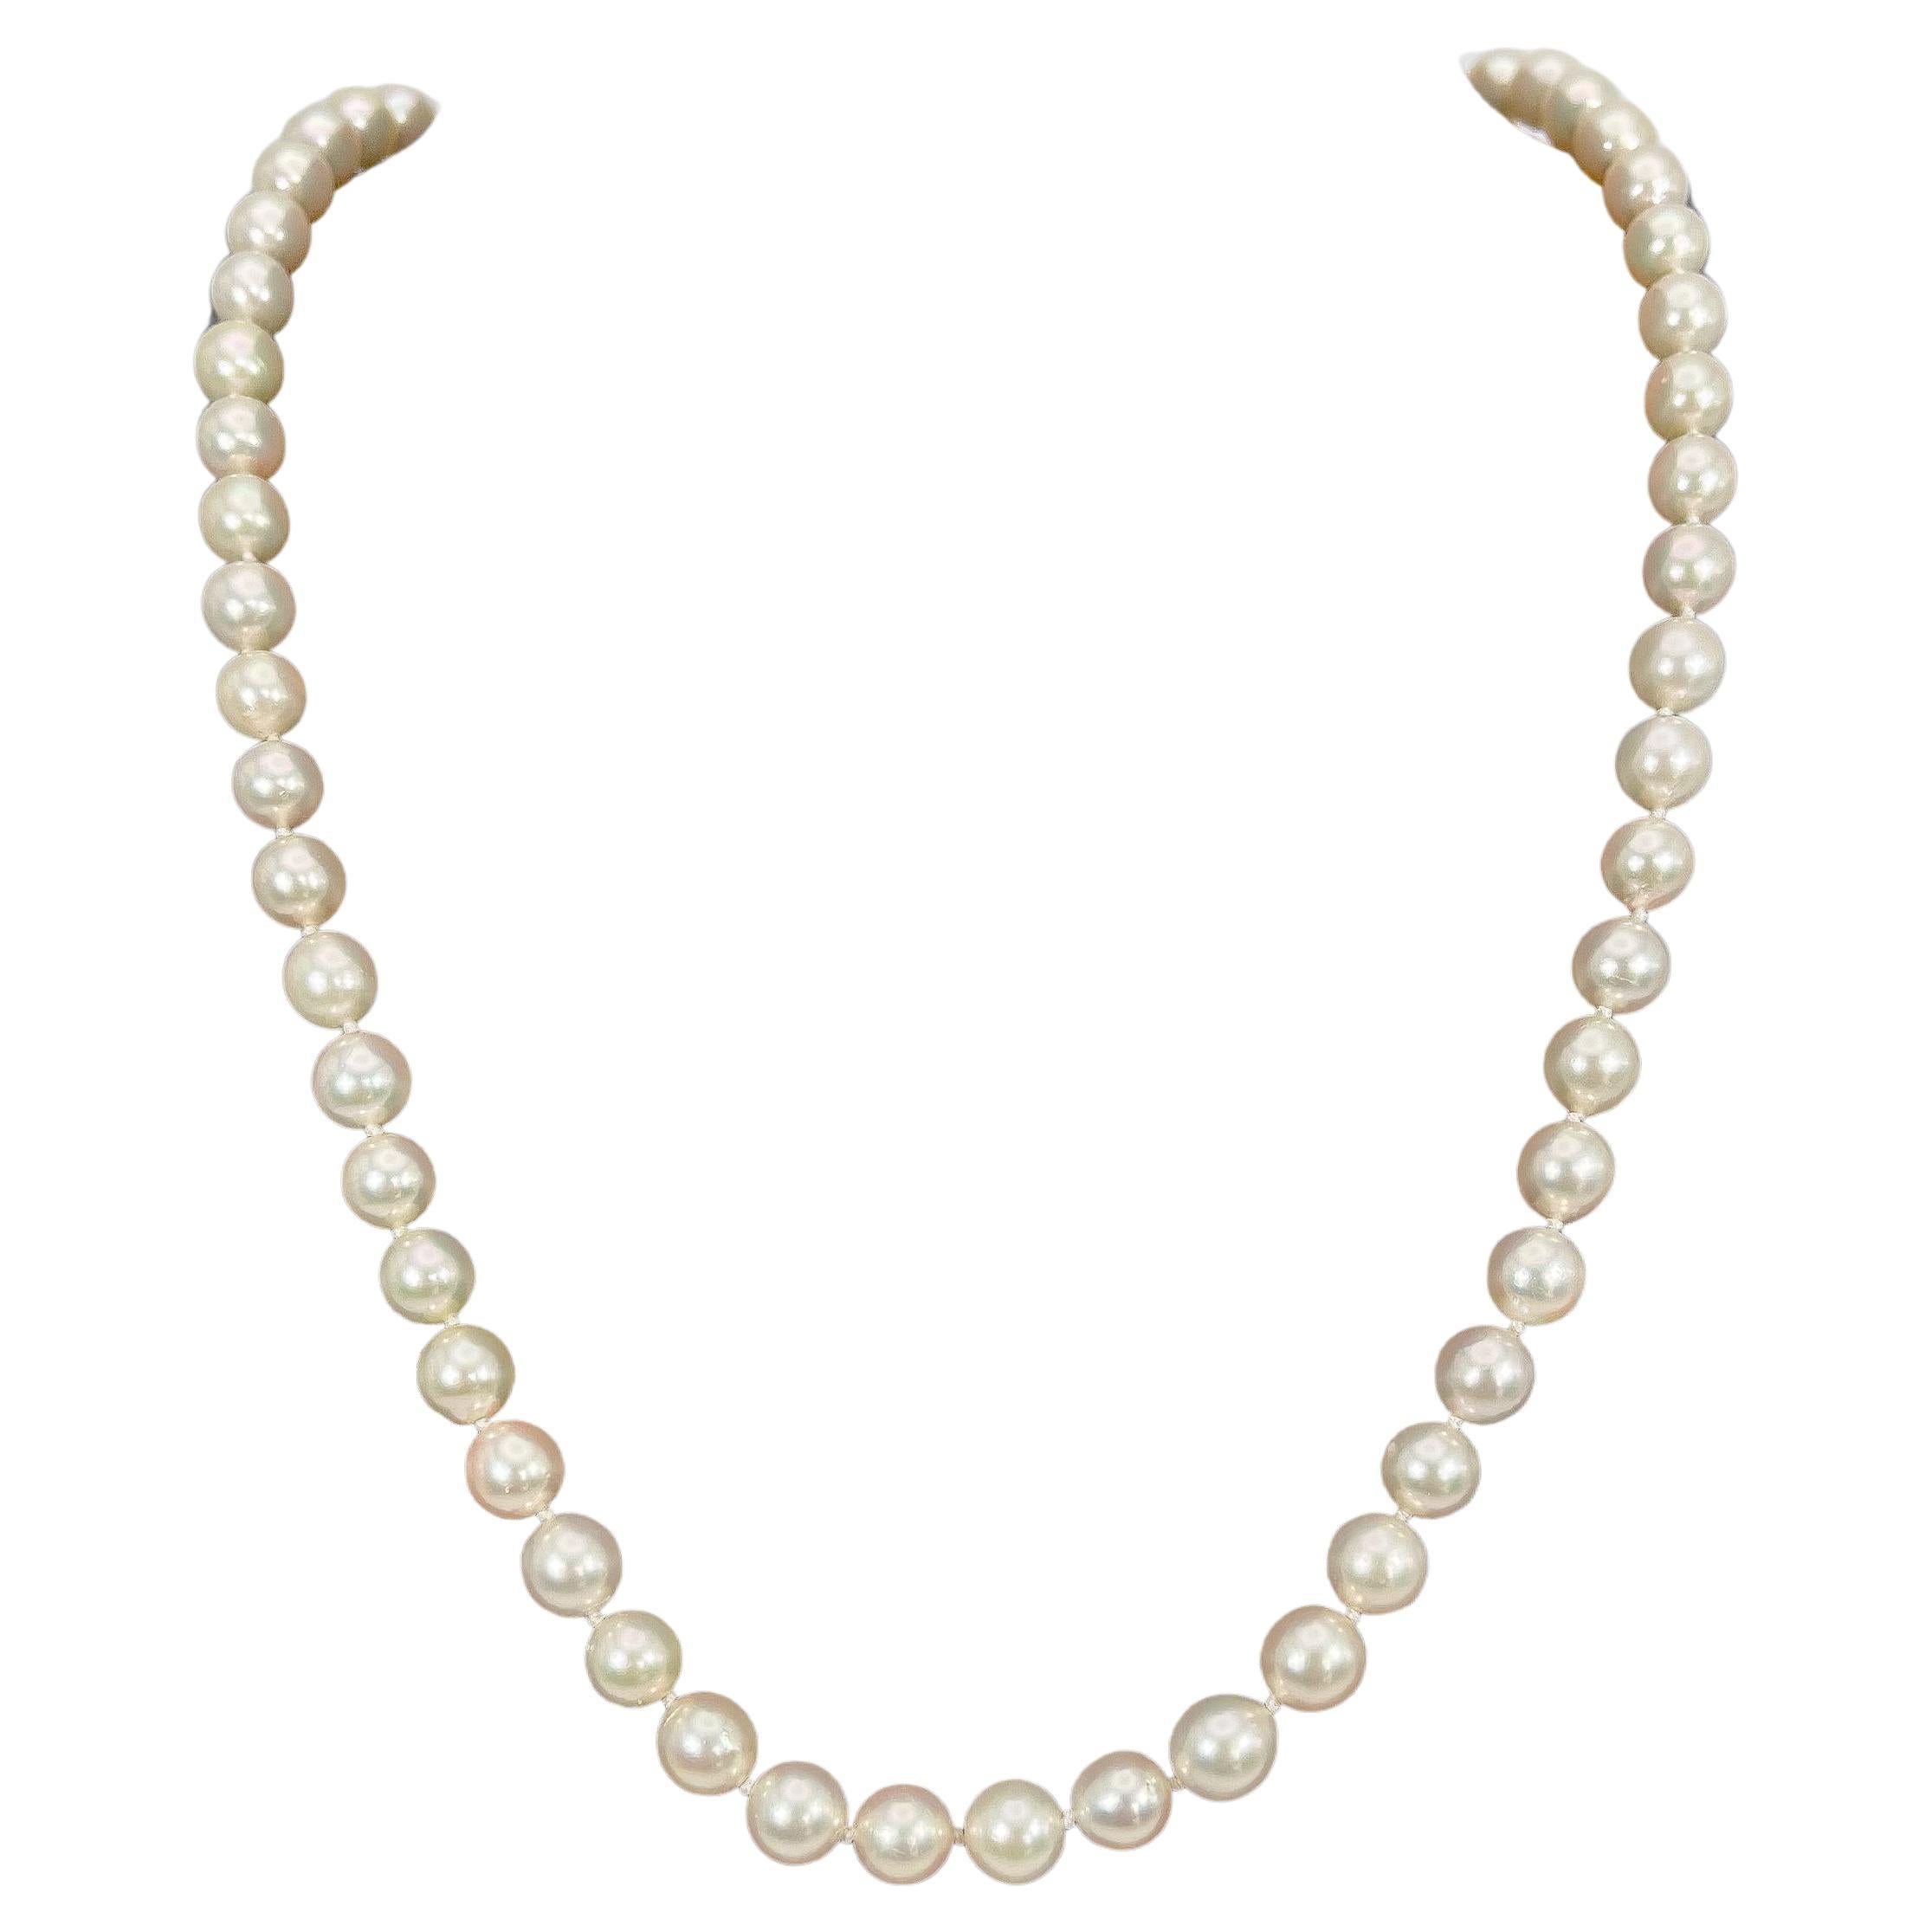 White Pearl Strand Necklace with Platinum Diamond Pearl Clasp